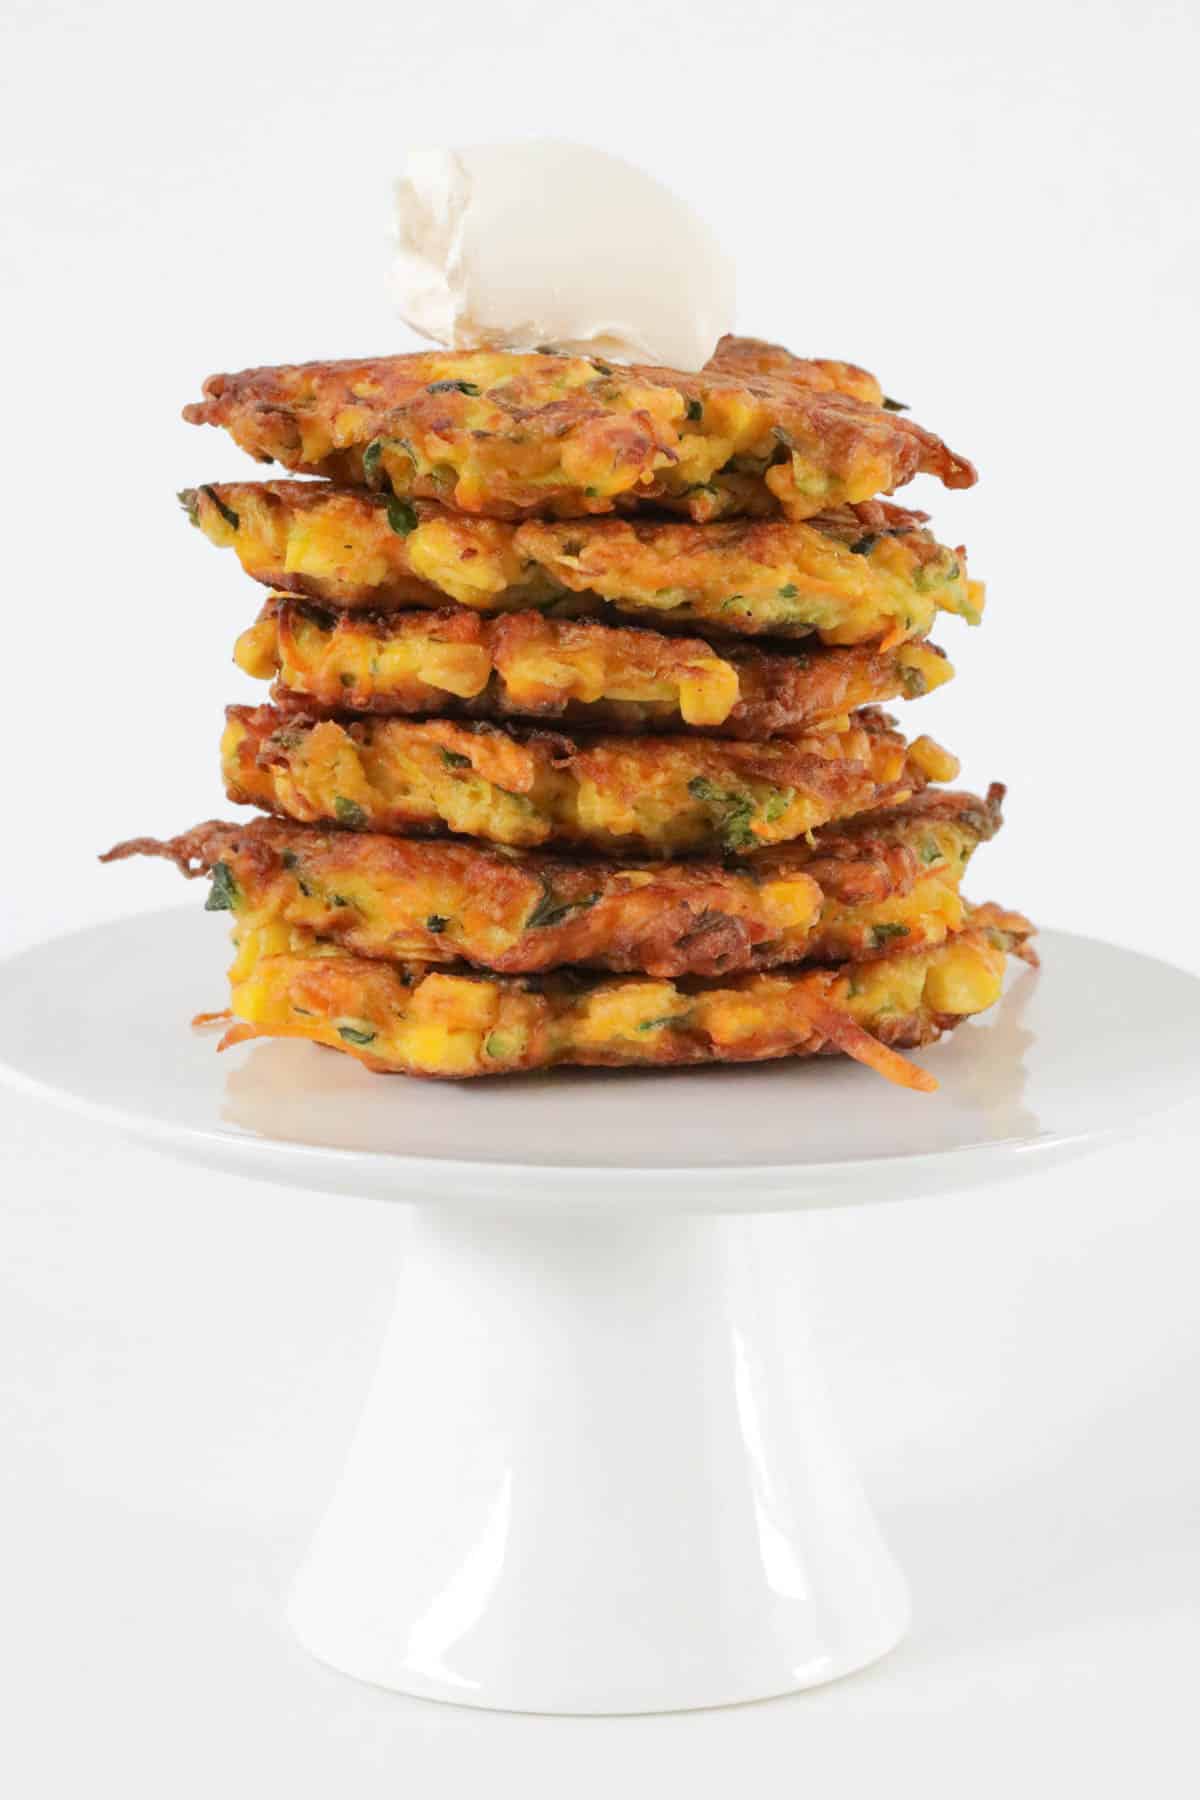 A stack of golden crunchy fritters on a cake stand.